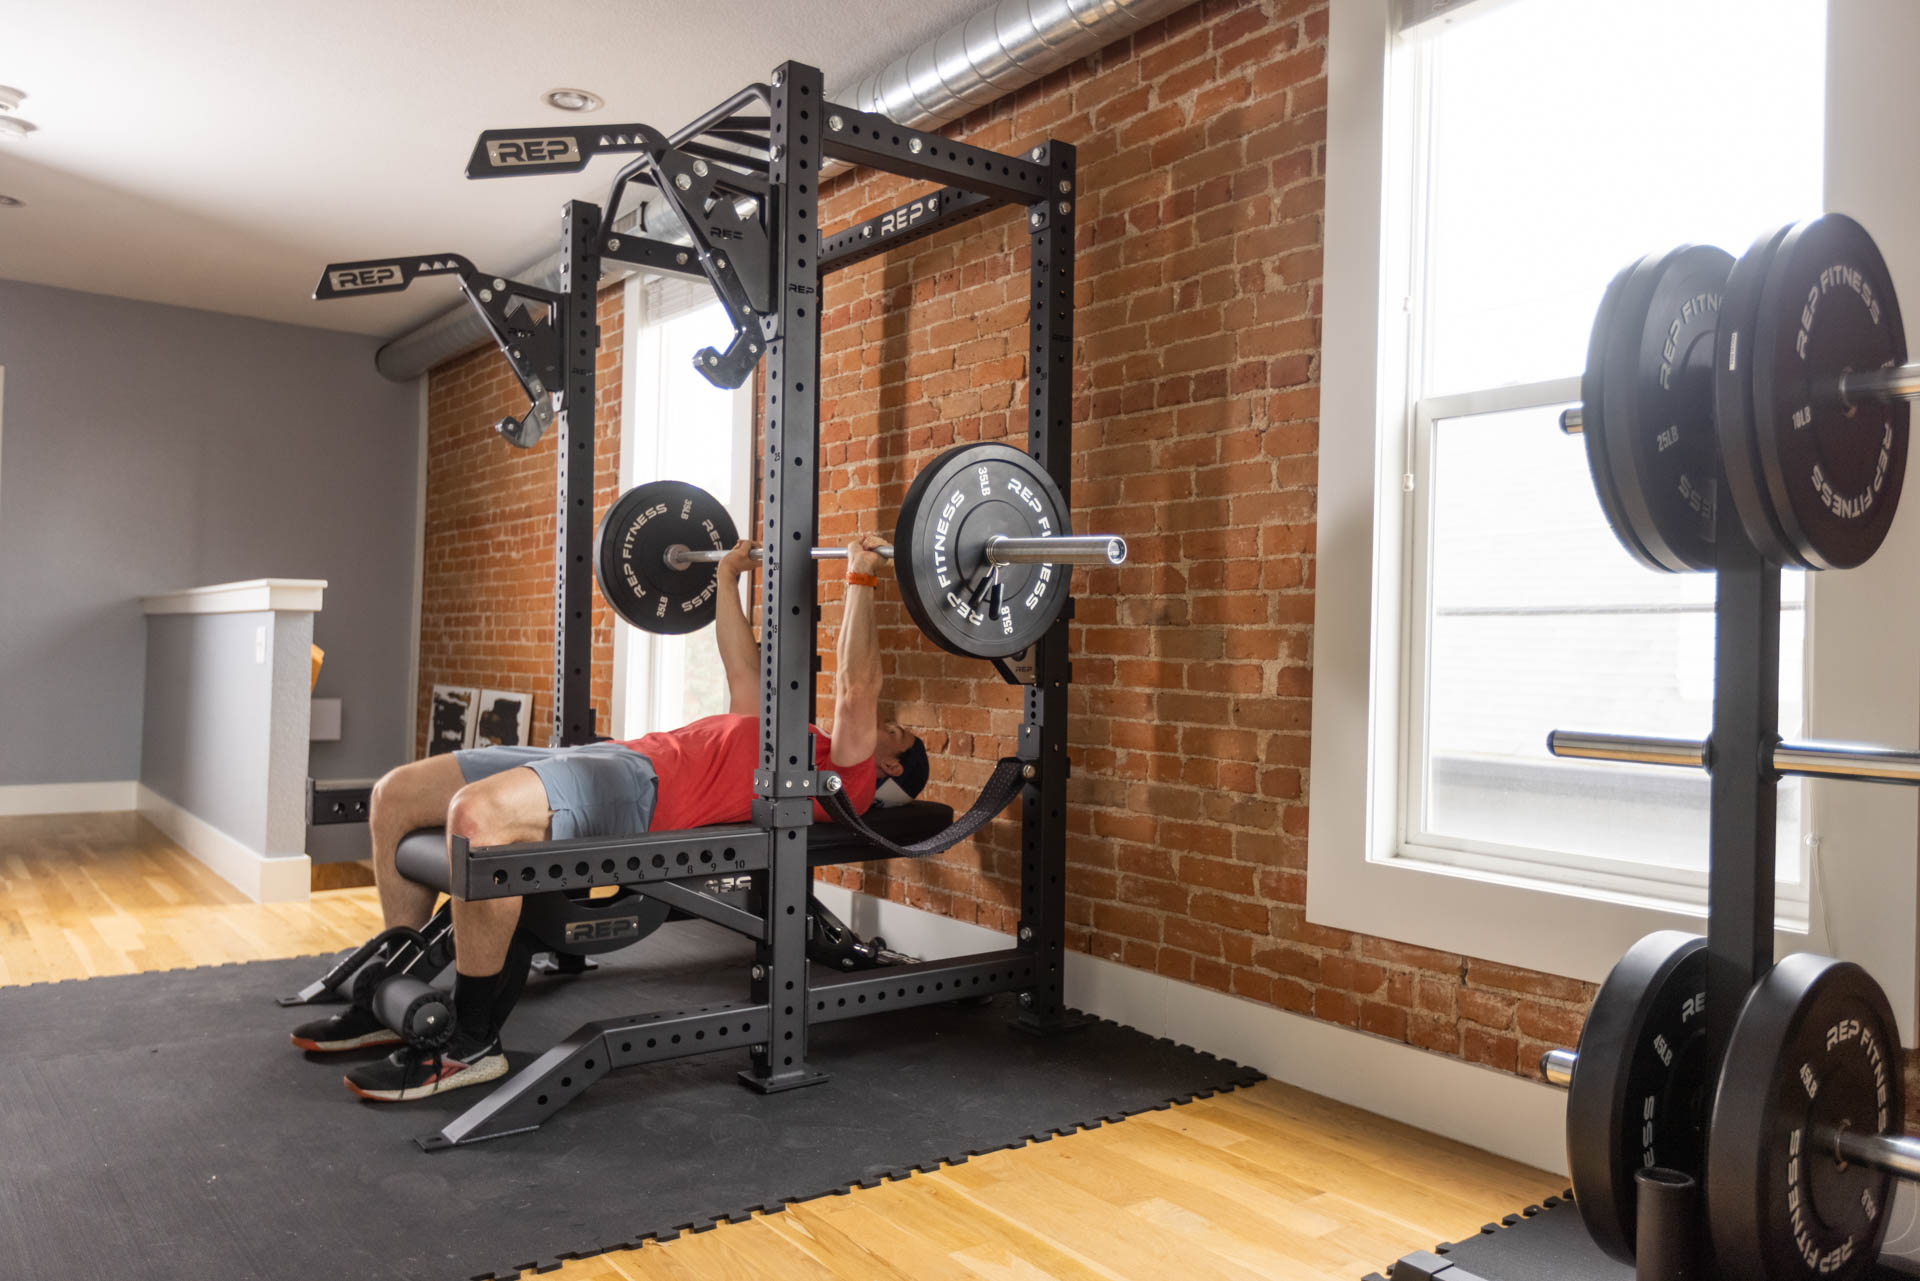 Strap Safeties on a PR-4000 Power Rack Being Used For Bench Press in a Home Gym 